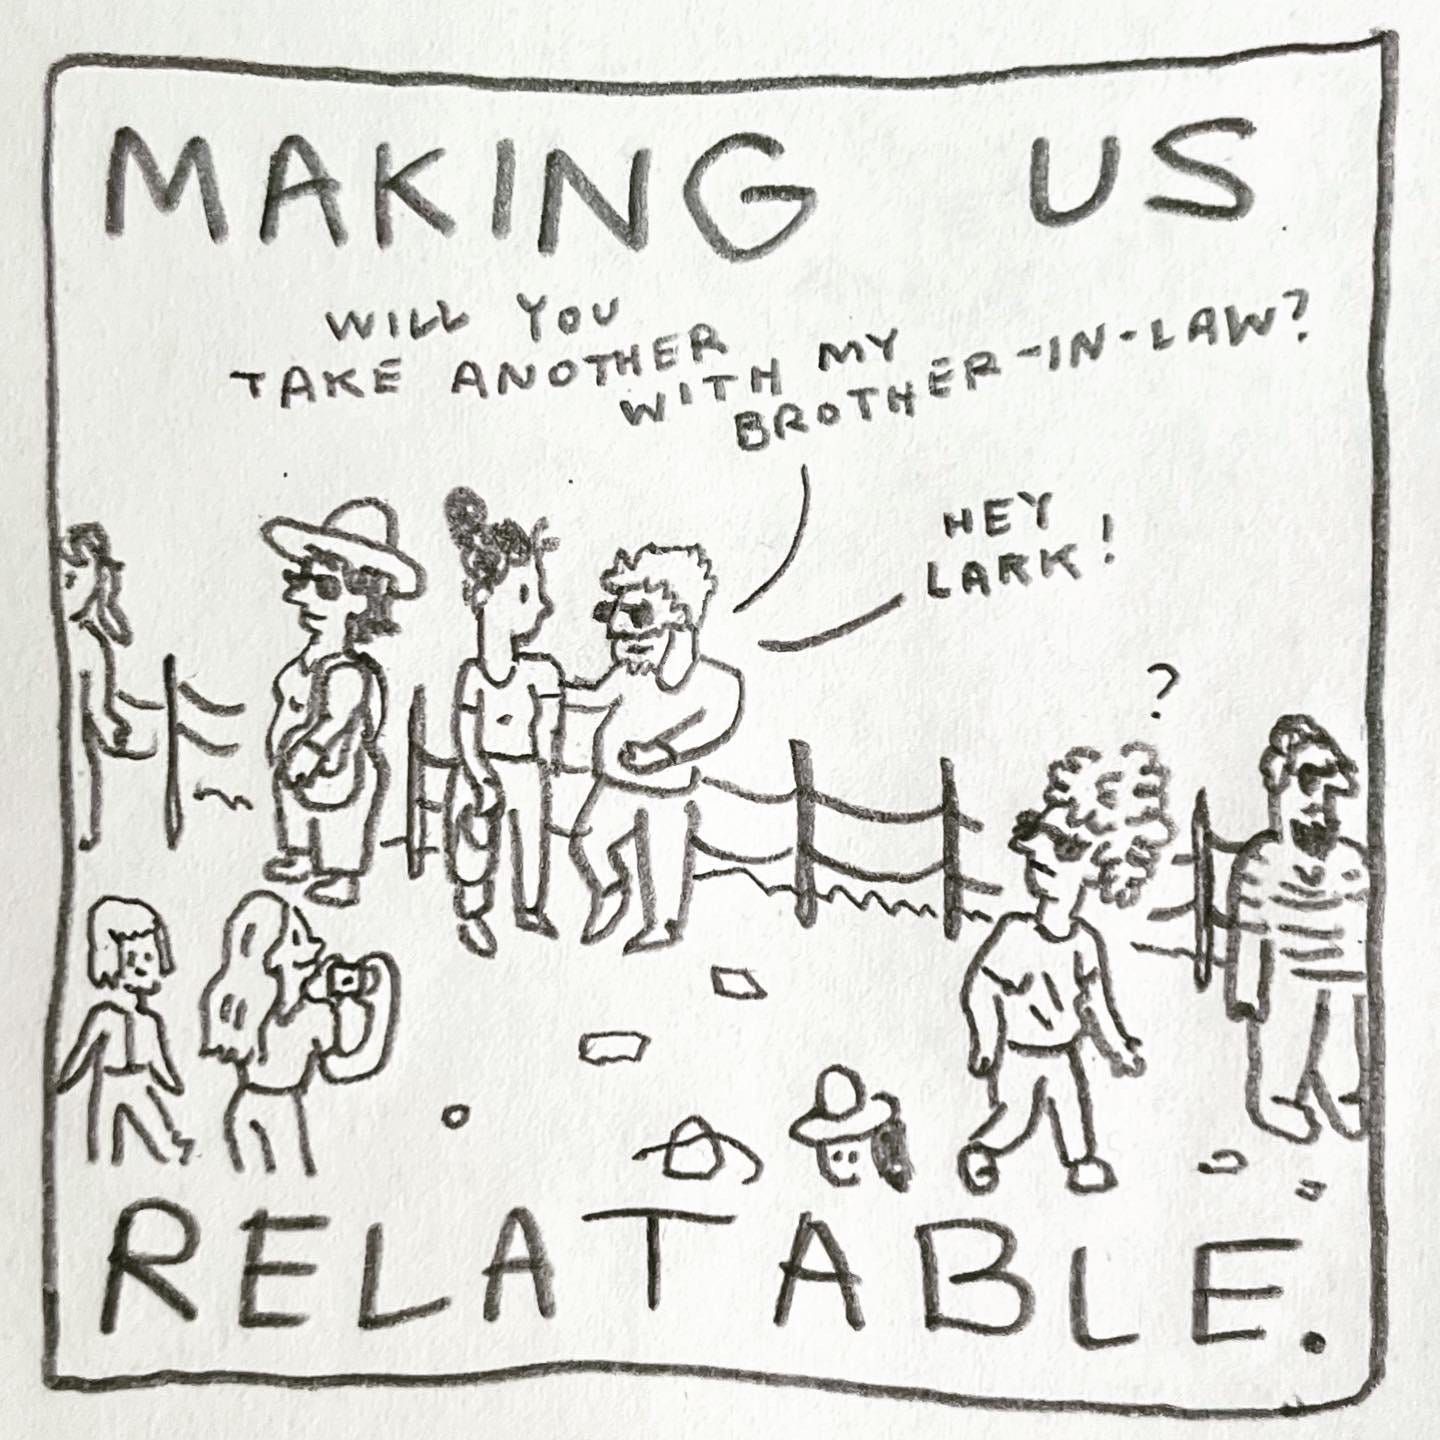 Panel 5: making us relatable. Image: tourists mill about a site with a small fence running along the edge. A man with beard and sunglasses, standing near the fence, rests his hand on his partner’s shoulder and gestures towards a woman holding a cell phone camera. He says "Will you take another with my brother-in-law? Hey Lark!” Lark turns to look with a question mark over their head.